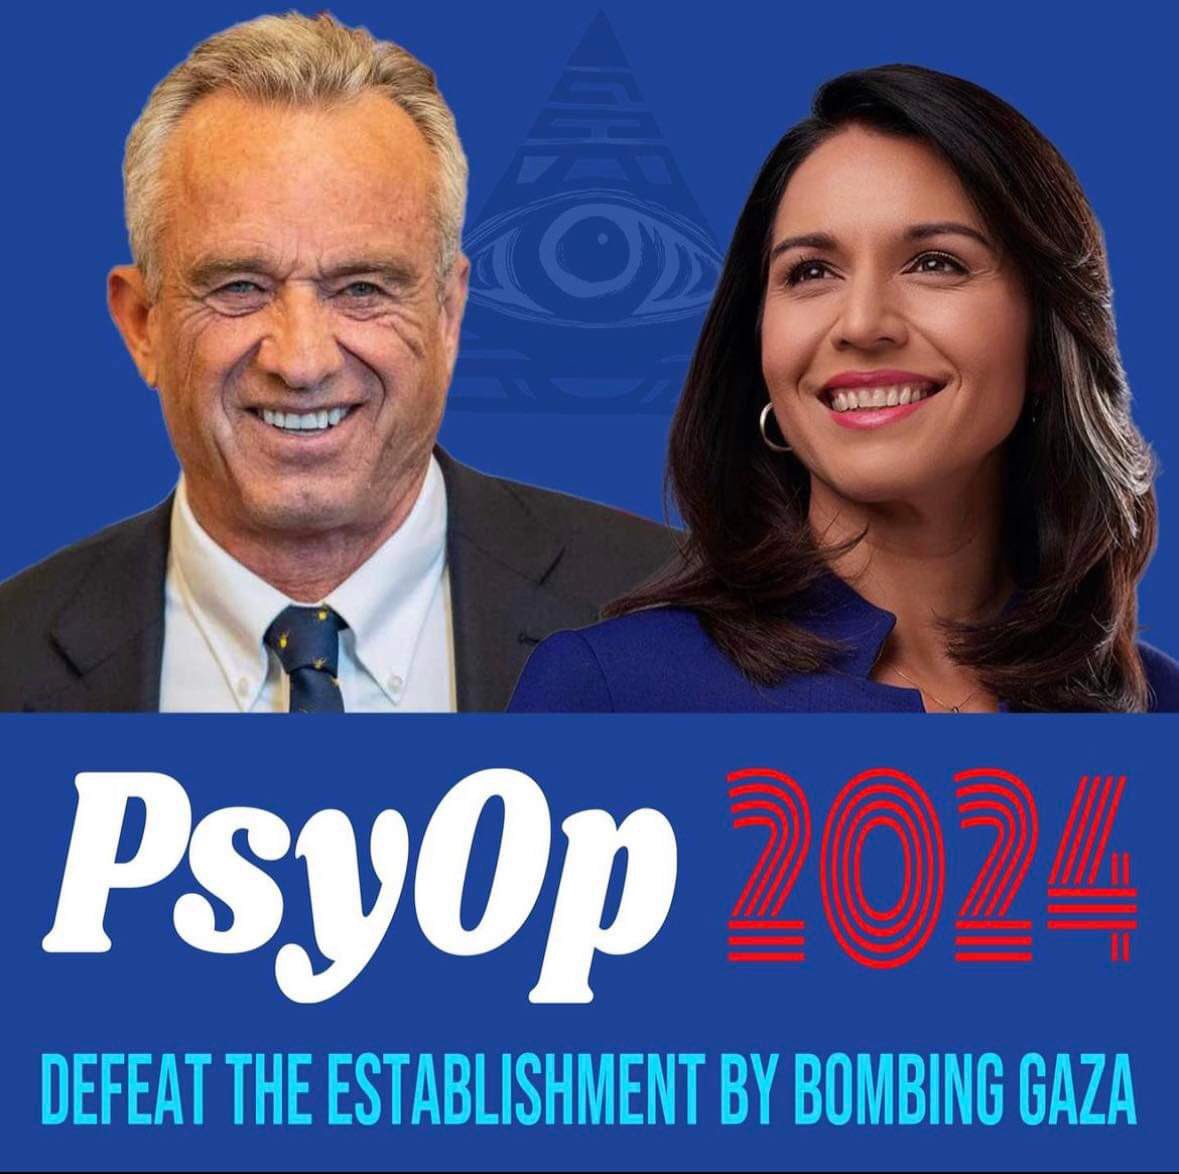 *Sigh* such a disappointment, these two. They’ve really shat the bed over this #Israel thing. #FreePalestine #RFKJr, #Tulsi #Gaza #Gaza_Geniocide